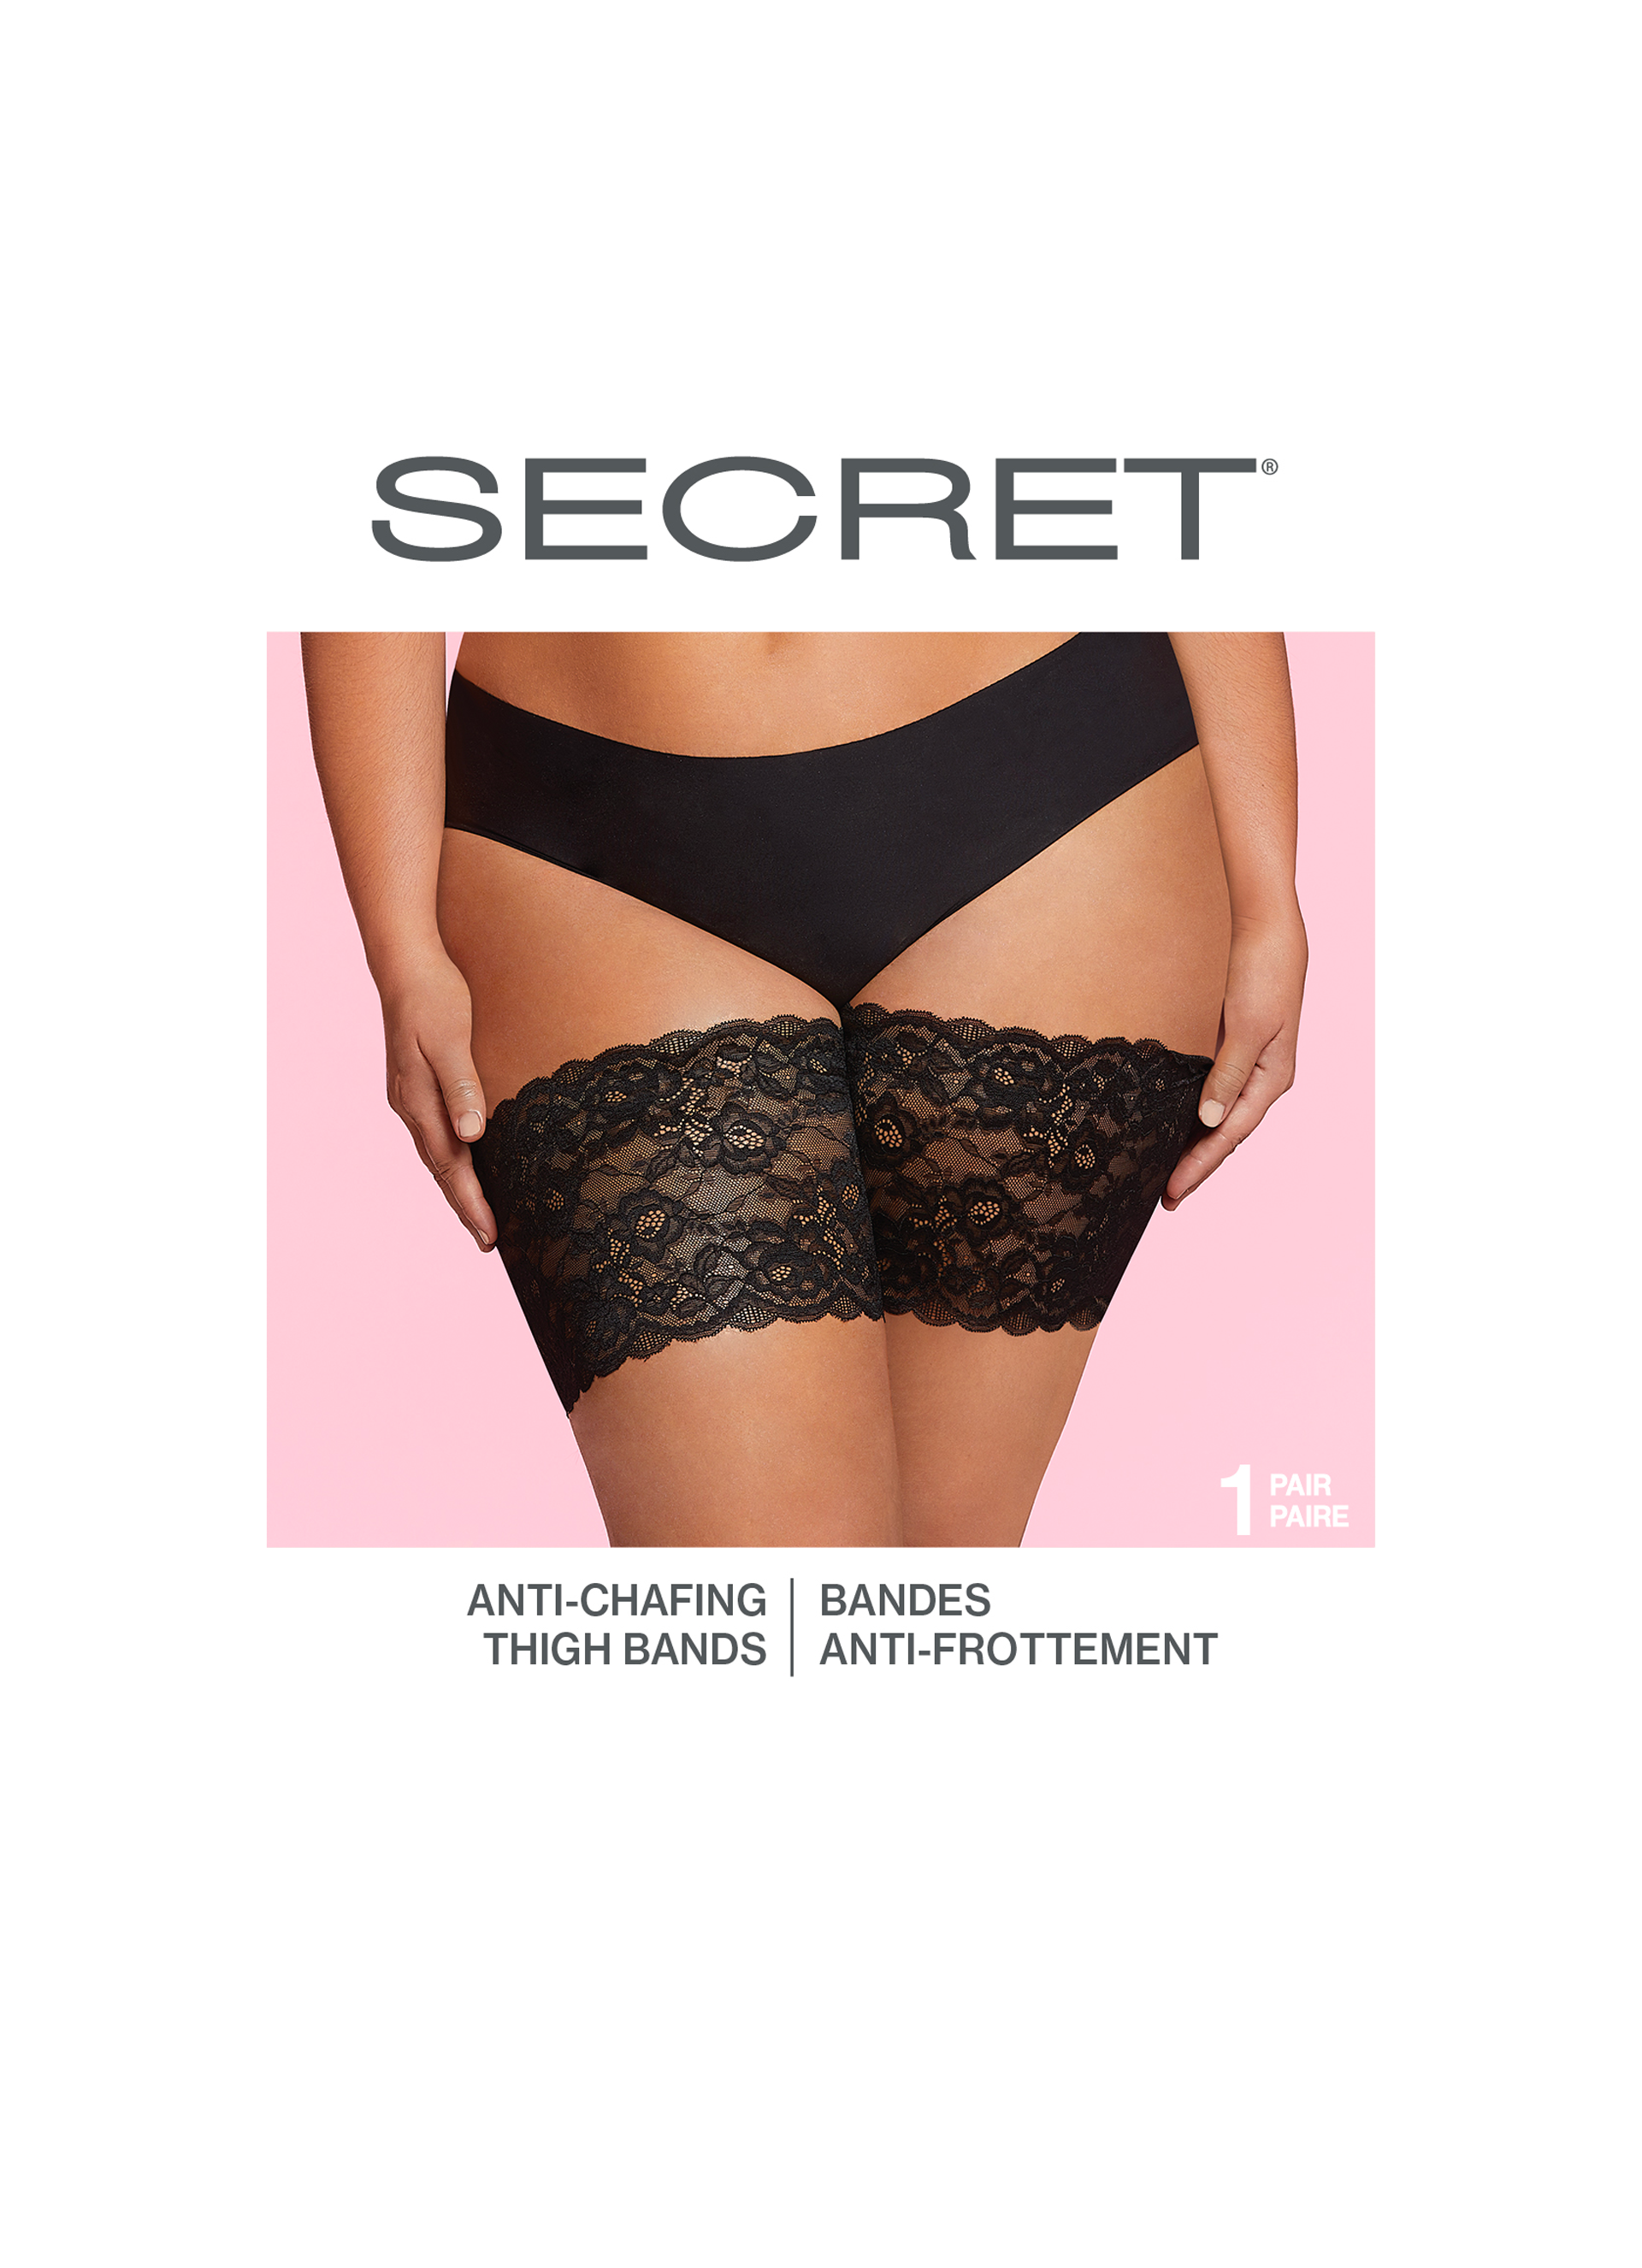 SECRET® Anti-Chafing Lace Thigh Bands - 1 Pair